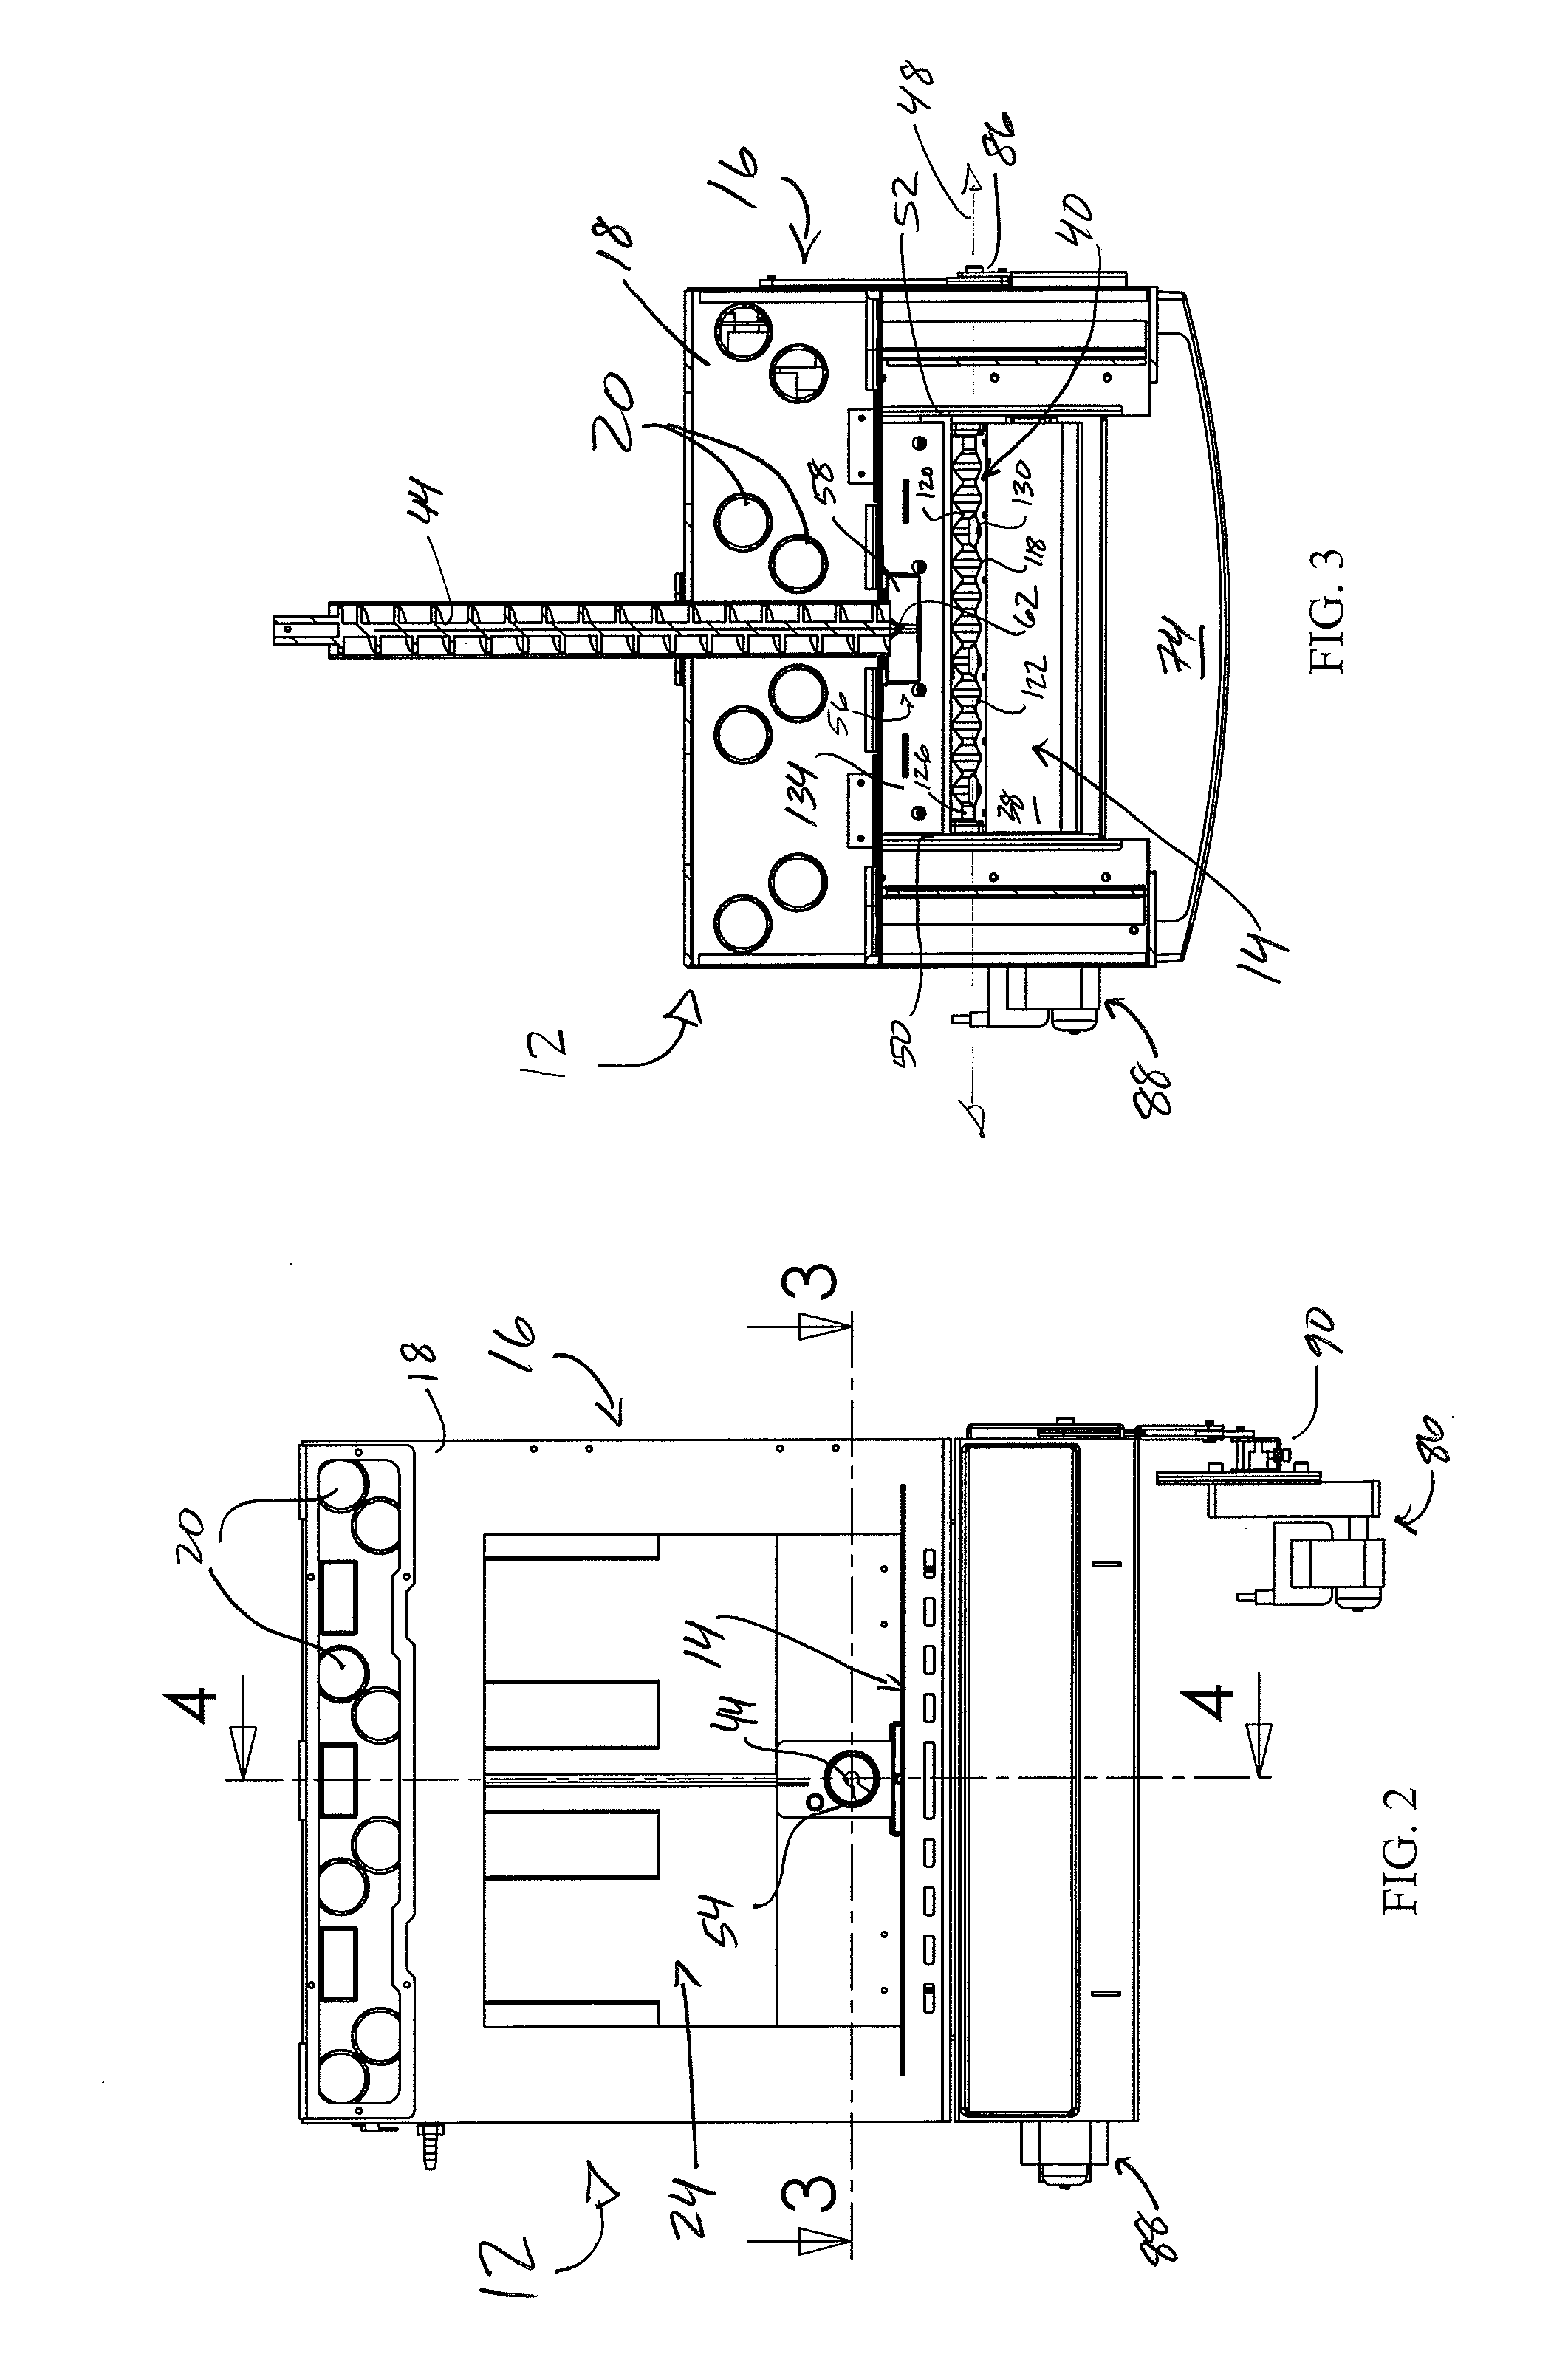 Apparatus for combustion of biofuels